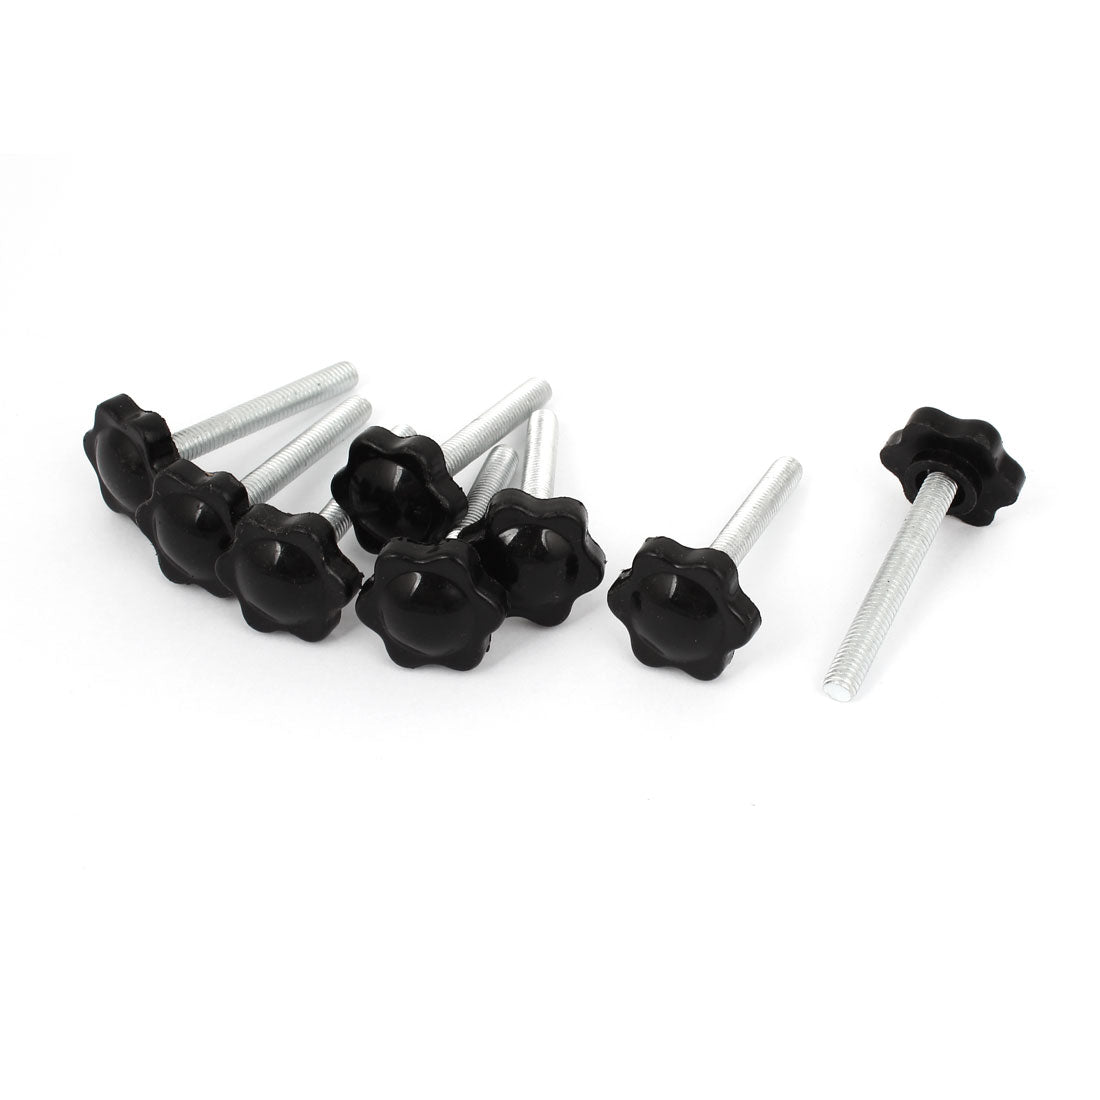 uxcell Uxcell 8 Pcs Black Spare Part M6 x 45mm Male Threaded Knurled Grip Star Knob